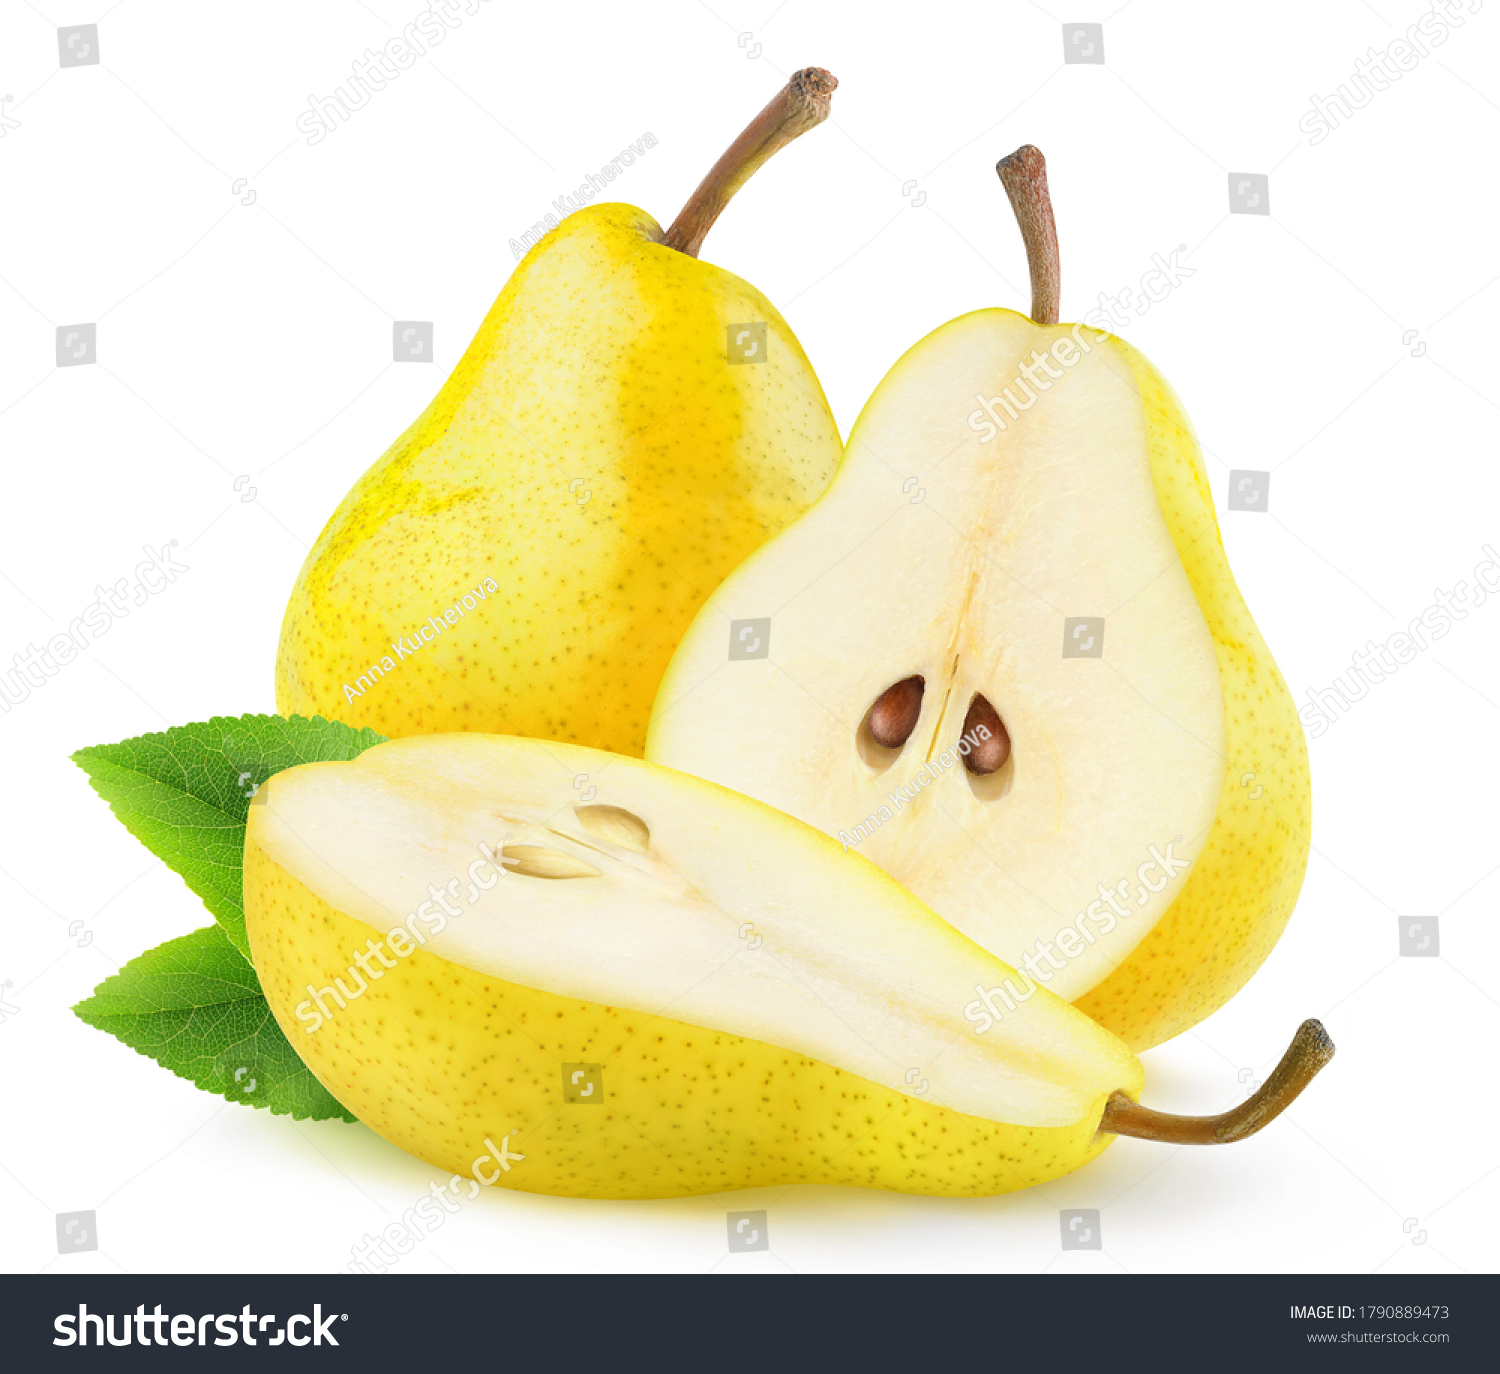 Isolated yellow pears. One whole pear fruit and one cut in half isolated on white background #1790889473